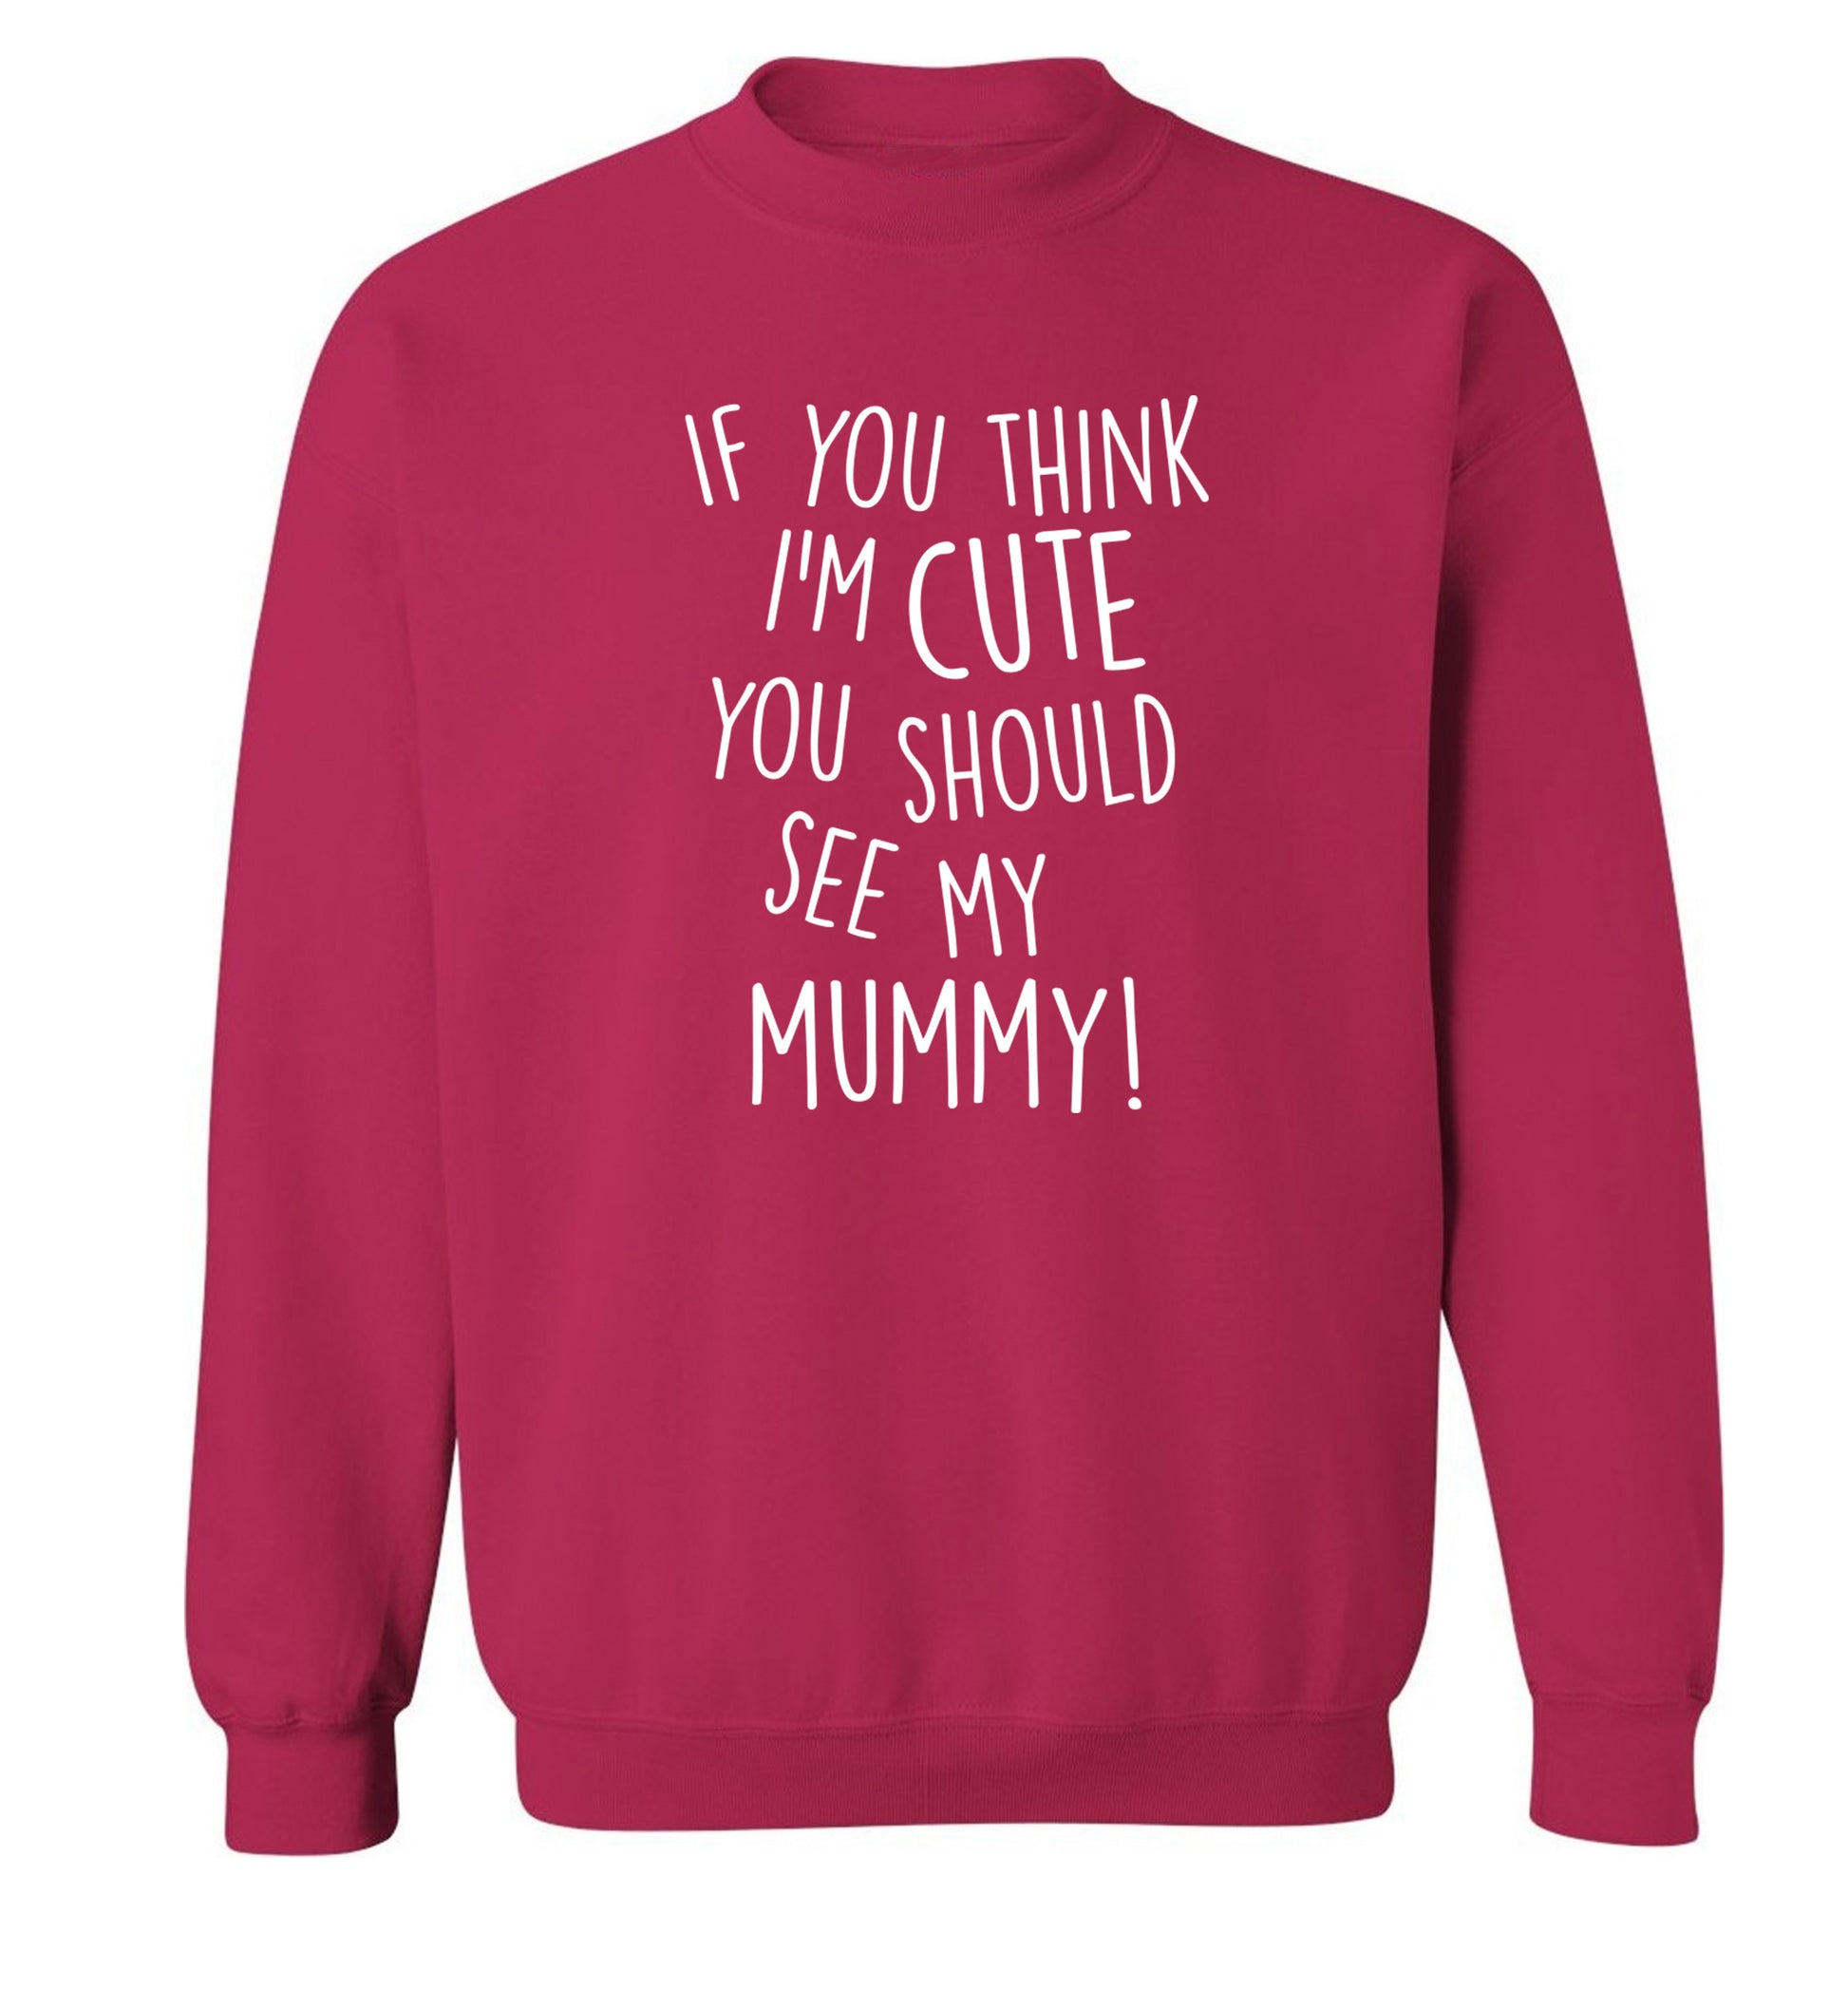 If you think I'm cute you should see my mummy Adult's unisex pink Sweater 2XL